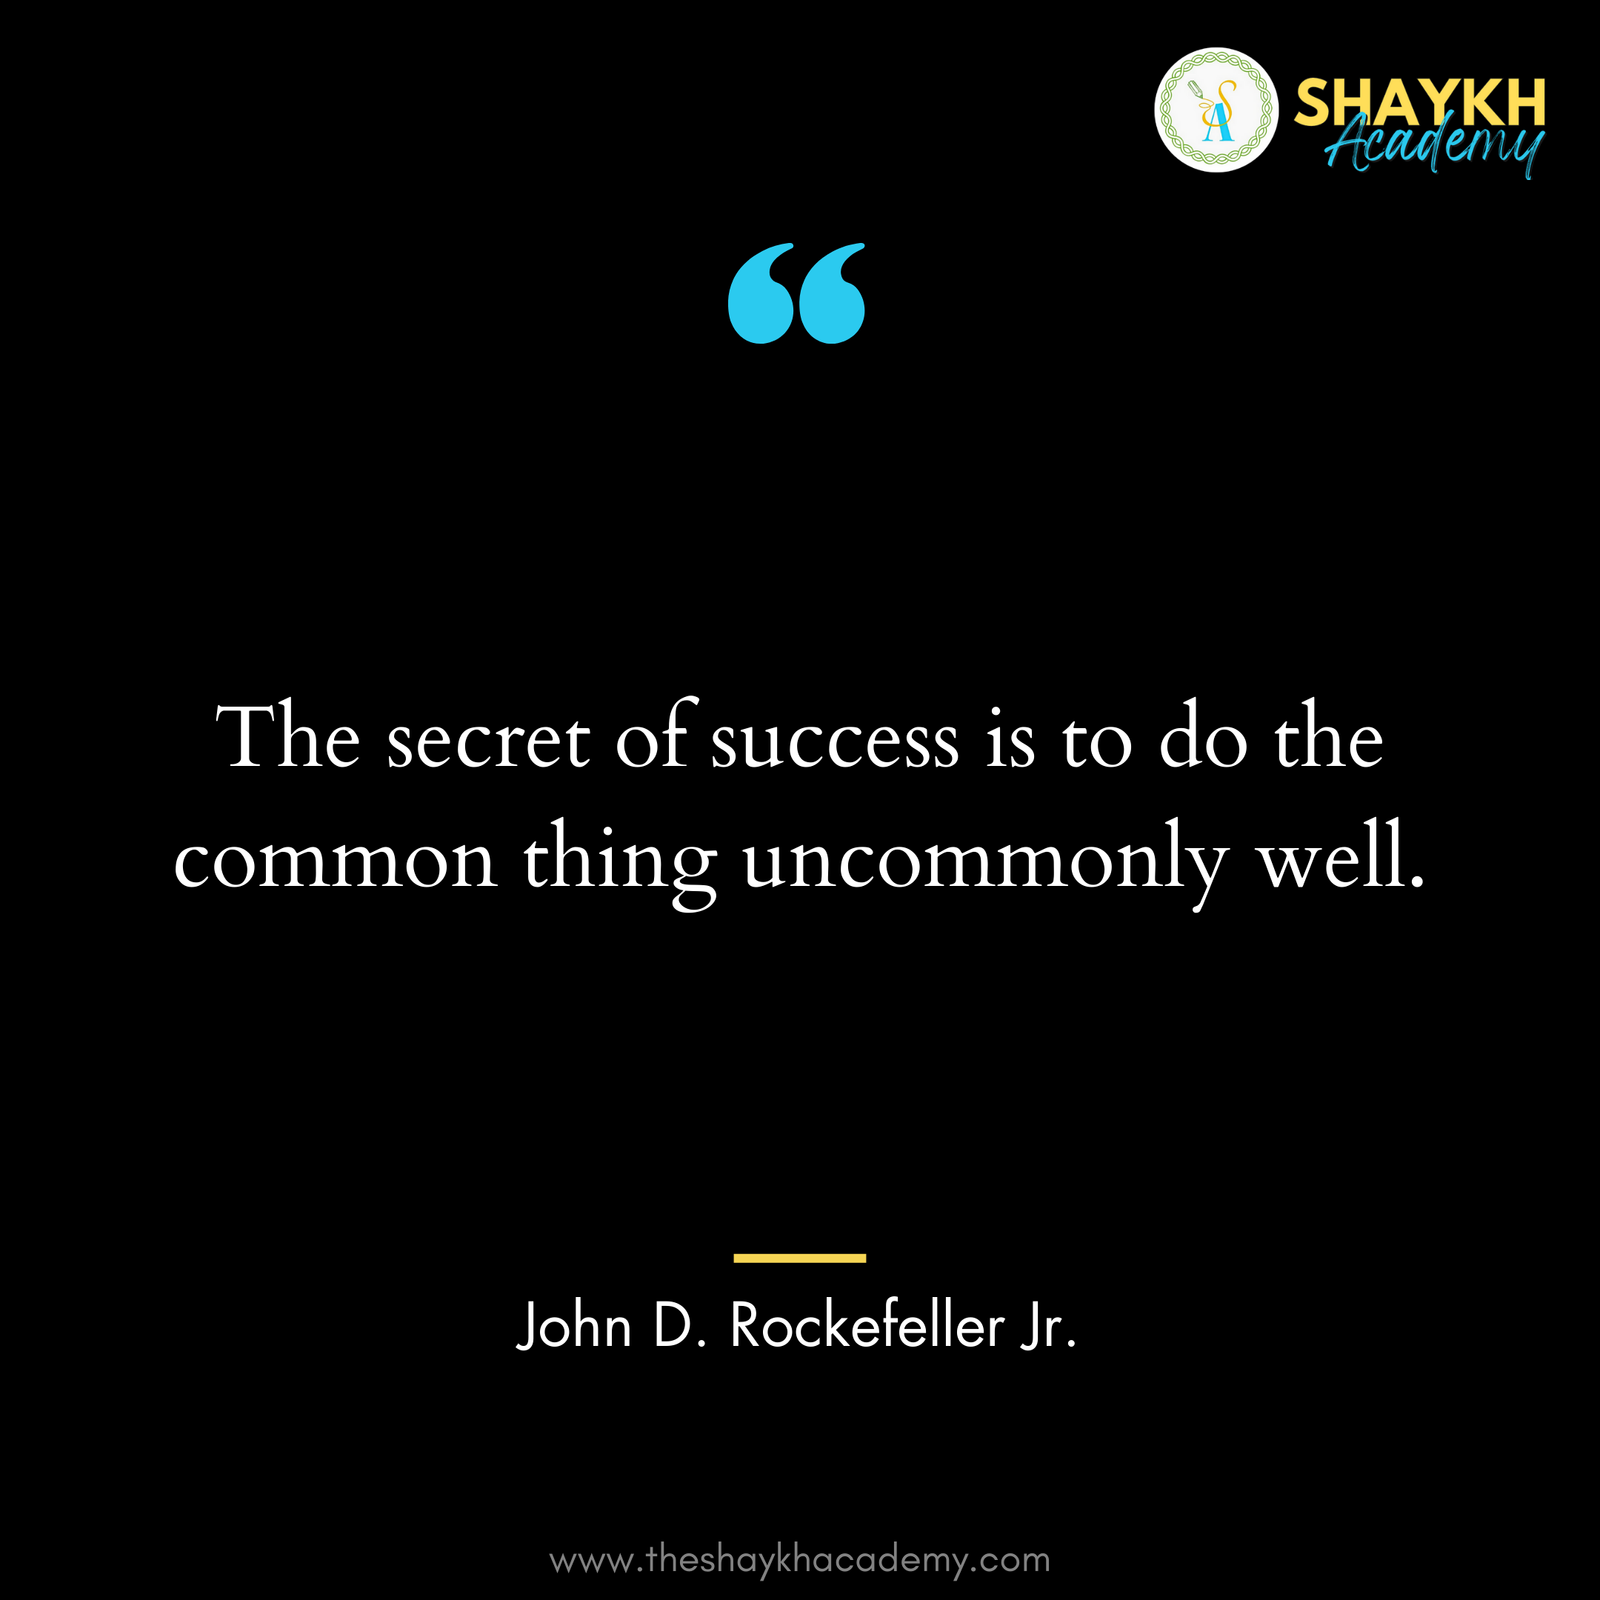 The secret of success is to do the common thing uncommonly well